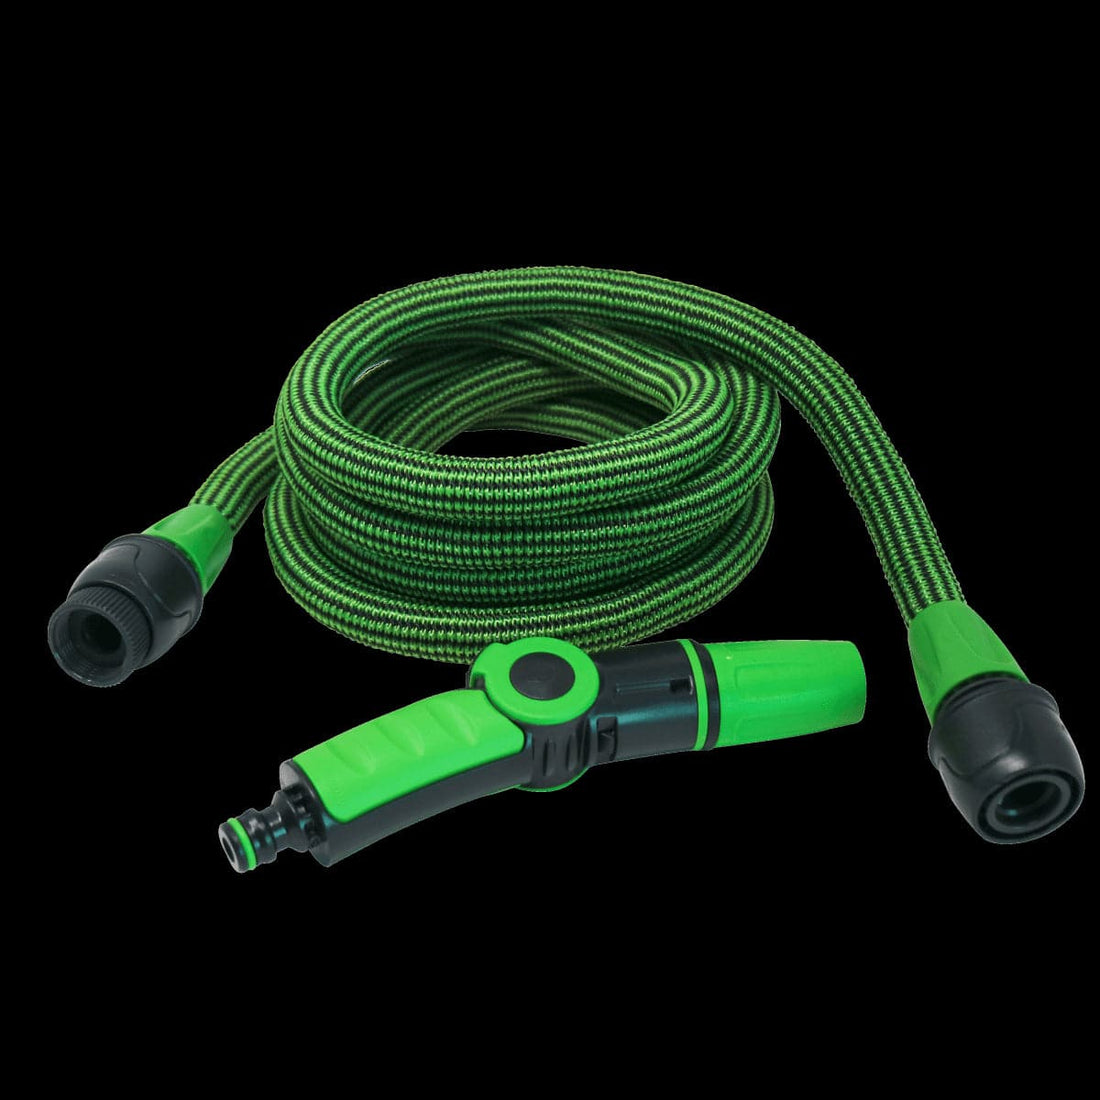 GEOLIA FABRIC EXTENSION HOSE 25M WITH 3JET COMPACT LANCE - best price from Maltashopper.com BR500015643